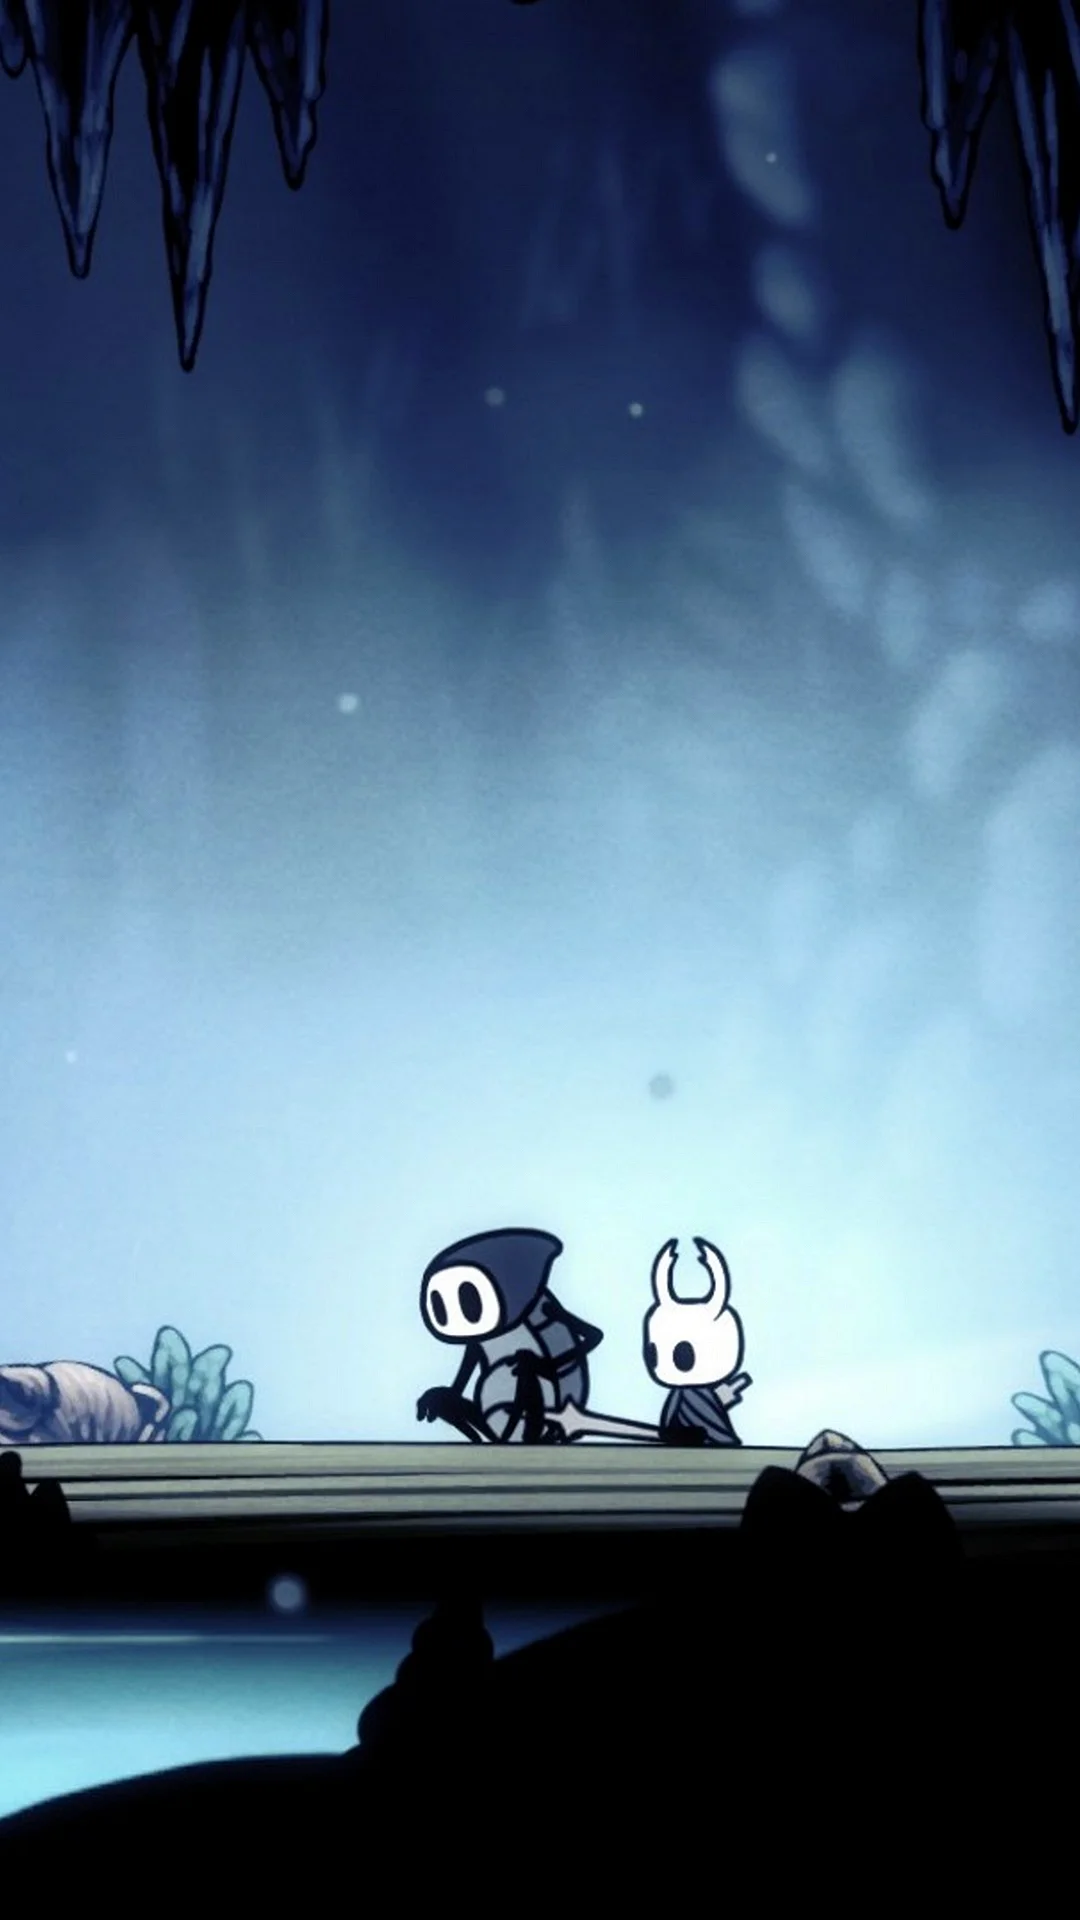 Hollow Knight Case Android Wallpaper For iPhone